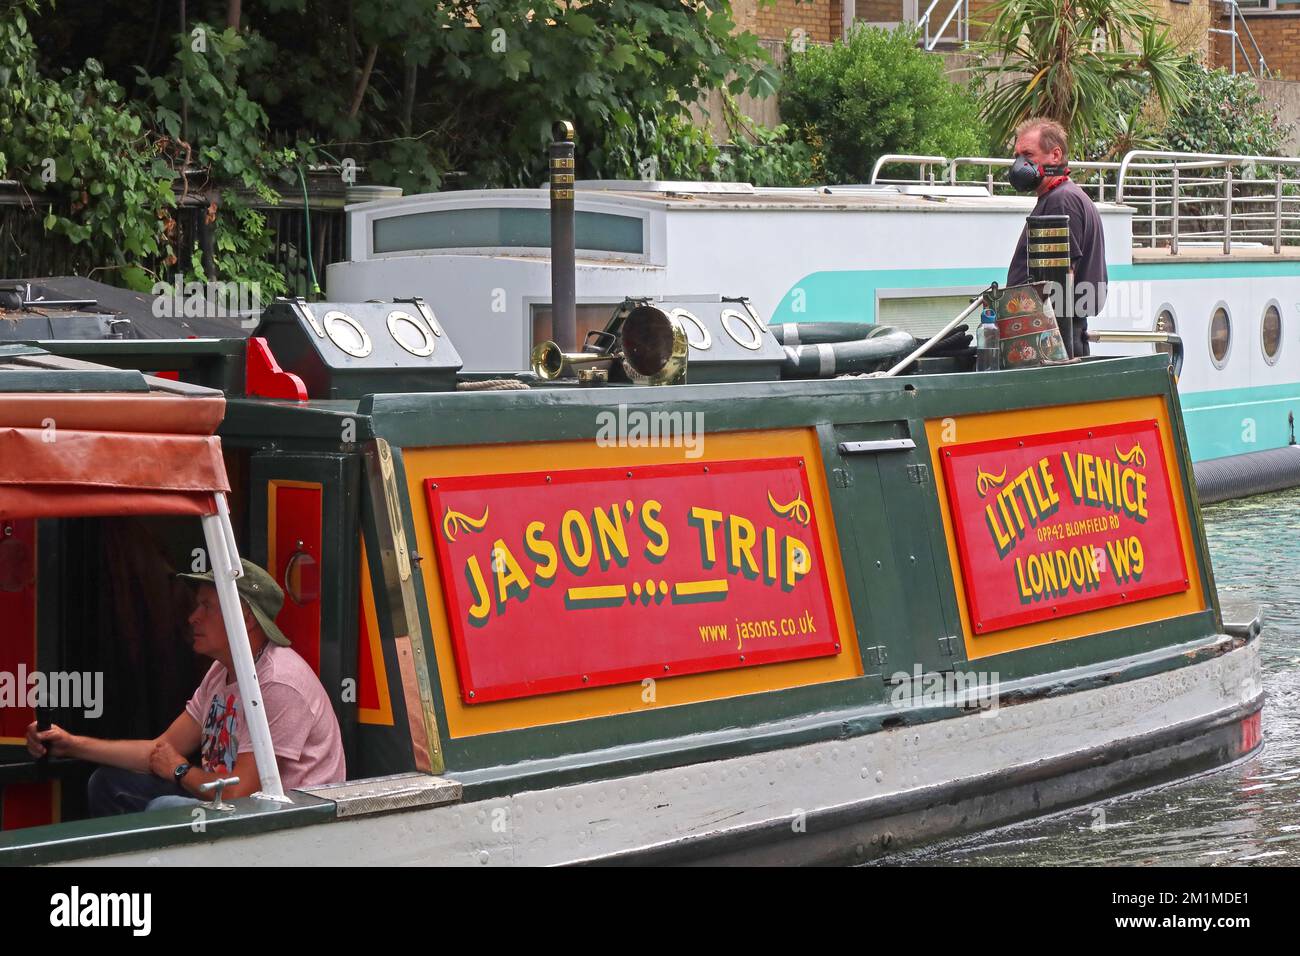 Jasons Trip - Little Venice - Canal boat barge narrowboat, on the Regents Canal, Camden, London, England, UK, NW1 9LP Stock Photo